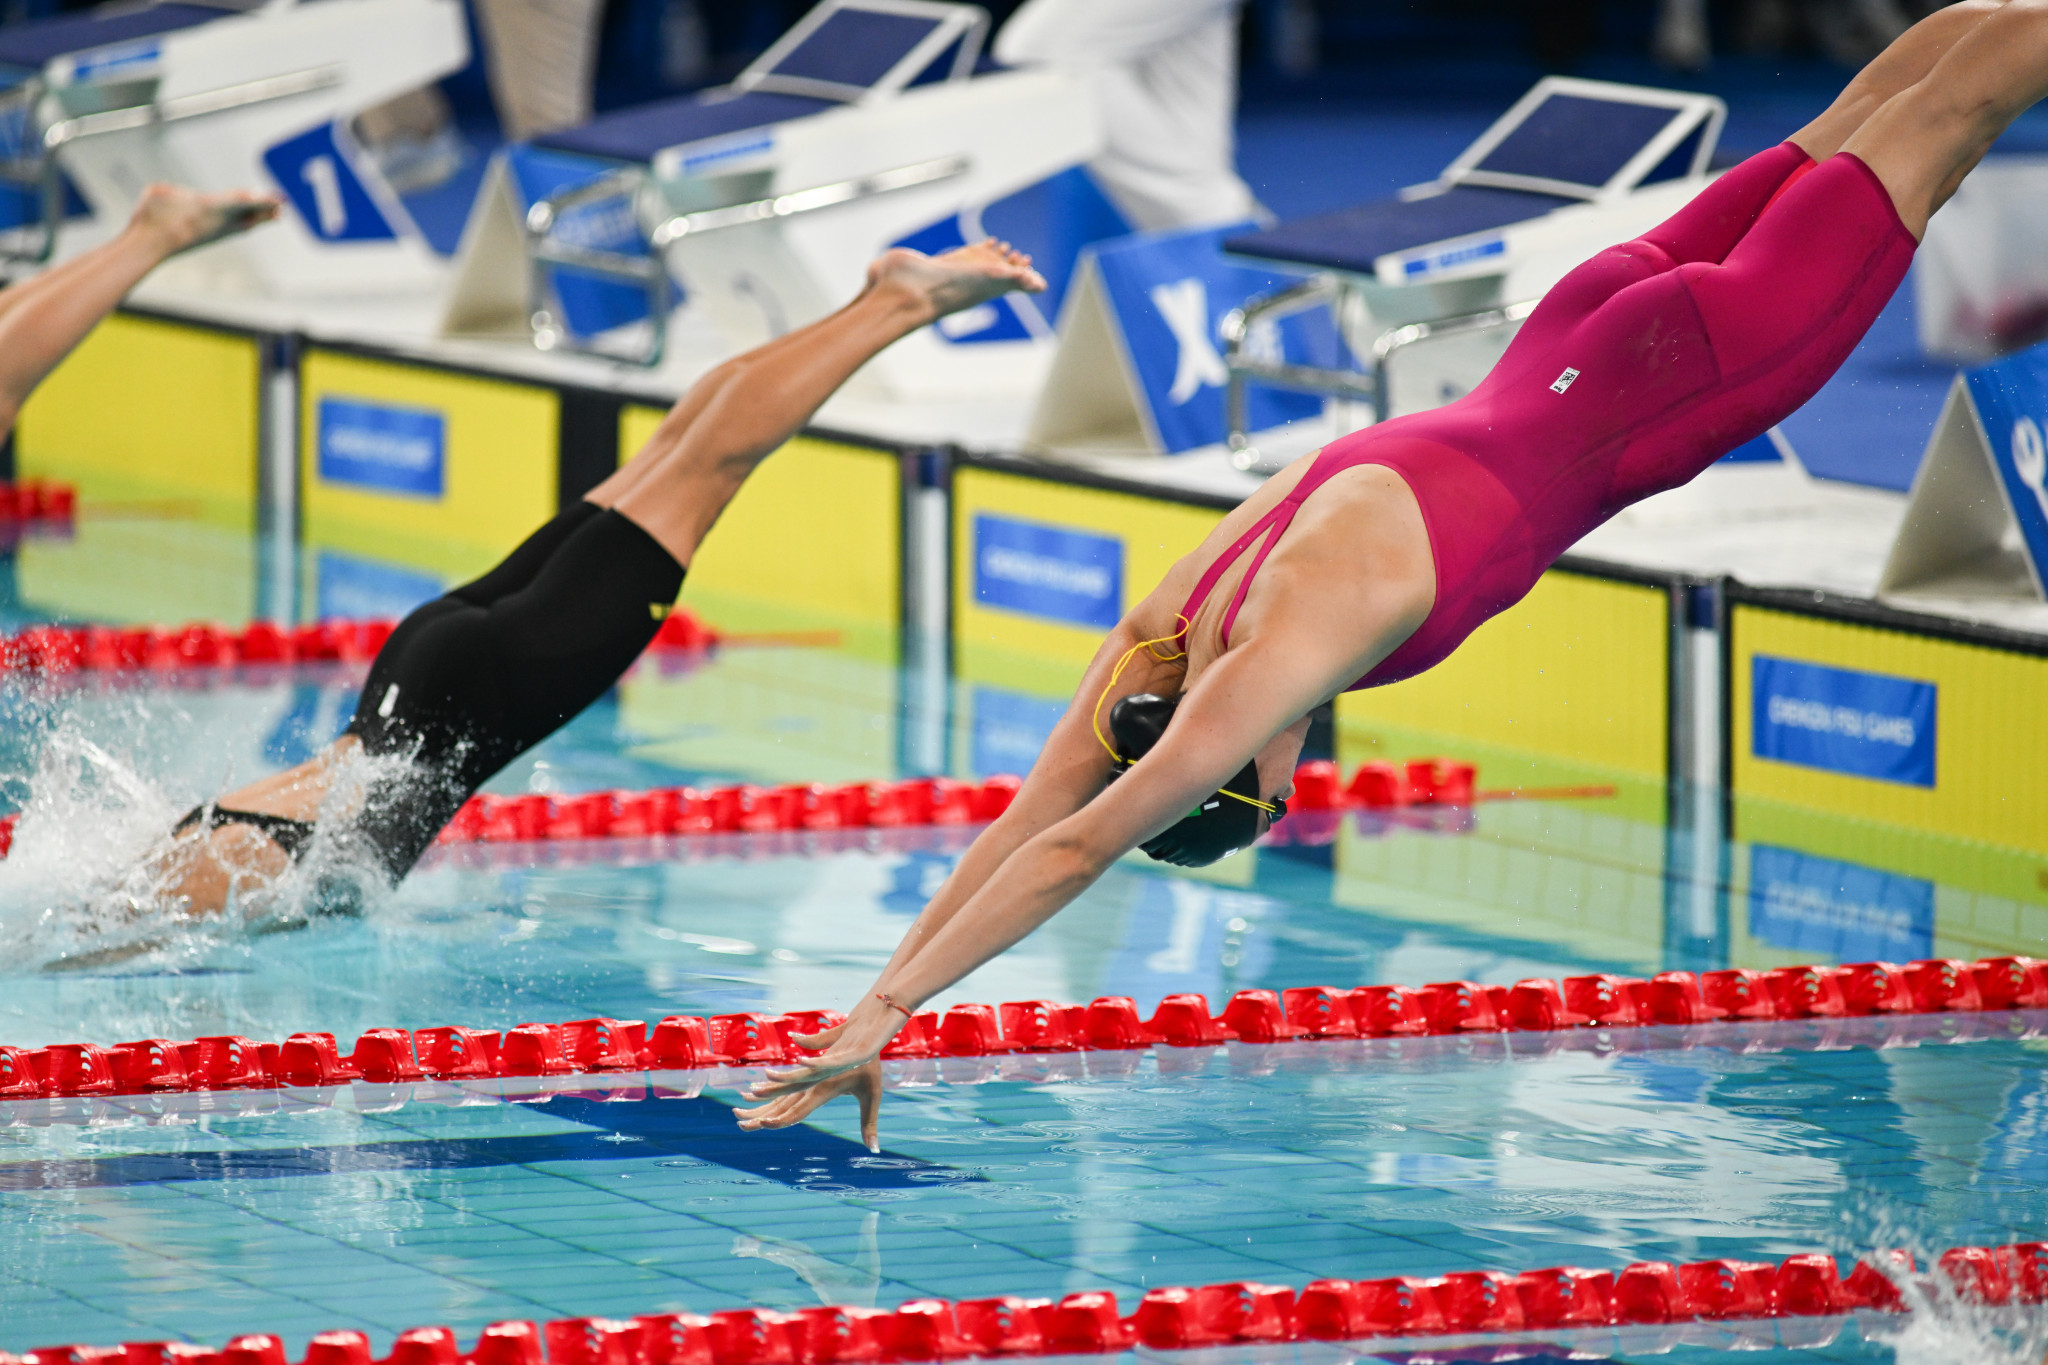 Swimming action from the women's 200 metres butterfly final ©Chengdu 2021